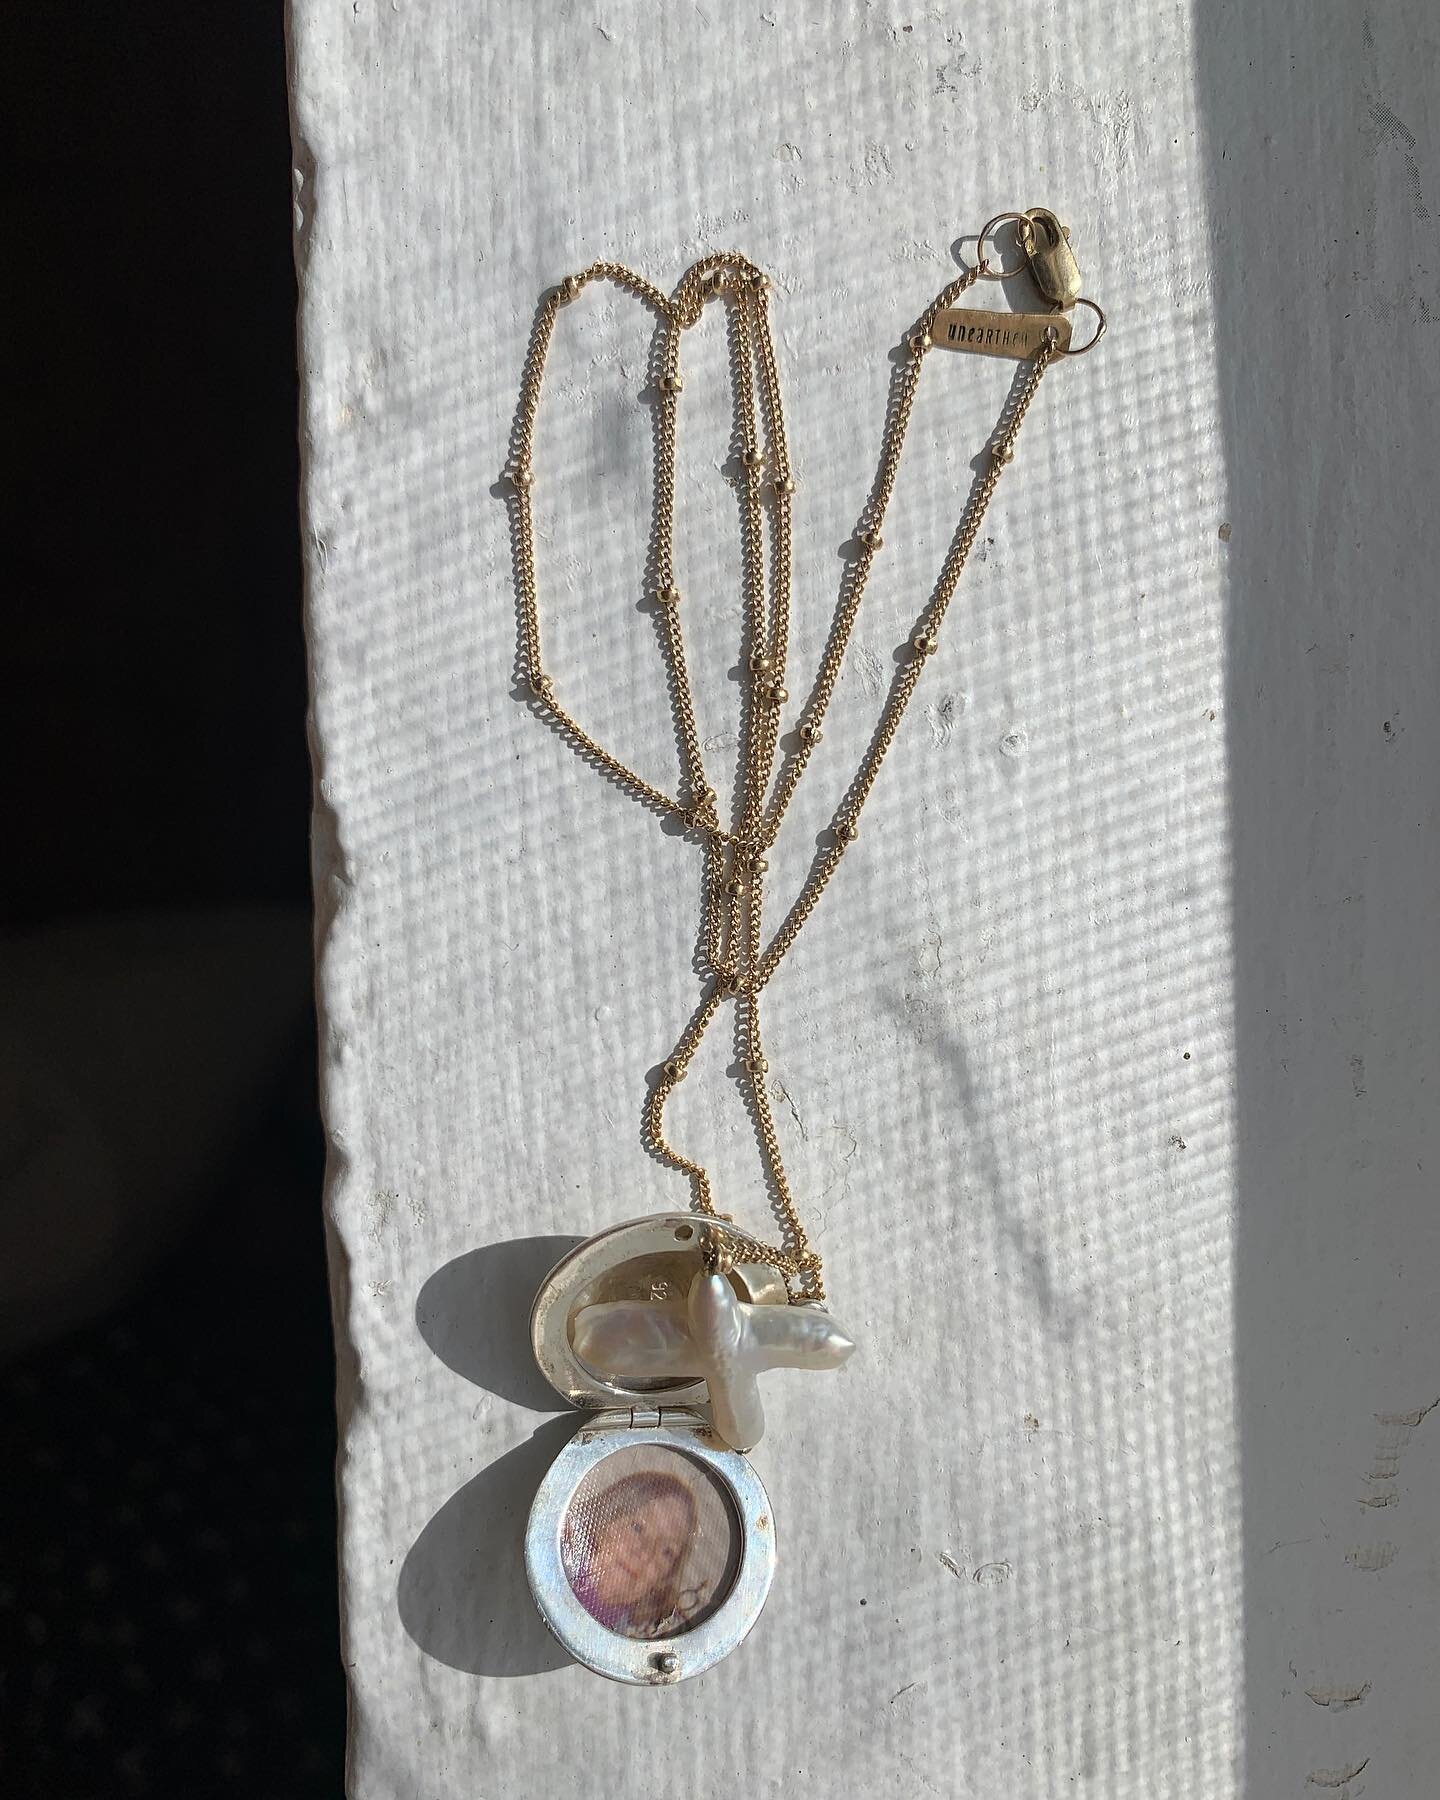 I added a locket with a picture of my grandmother to my personal jewelry recently. It feels so good to wear it close to my heart. DM for info about having a one of a kind locket made for you. Happy Valentines Day! ❤️